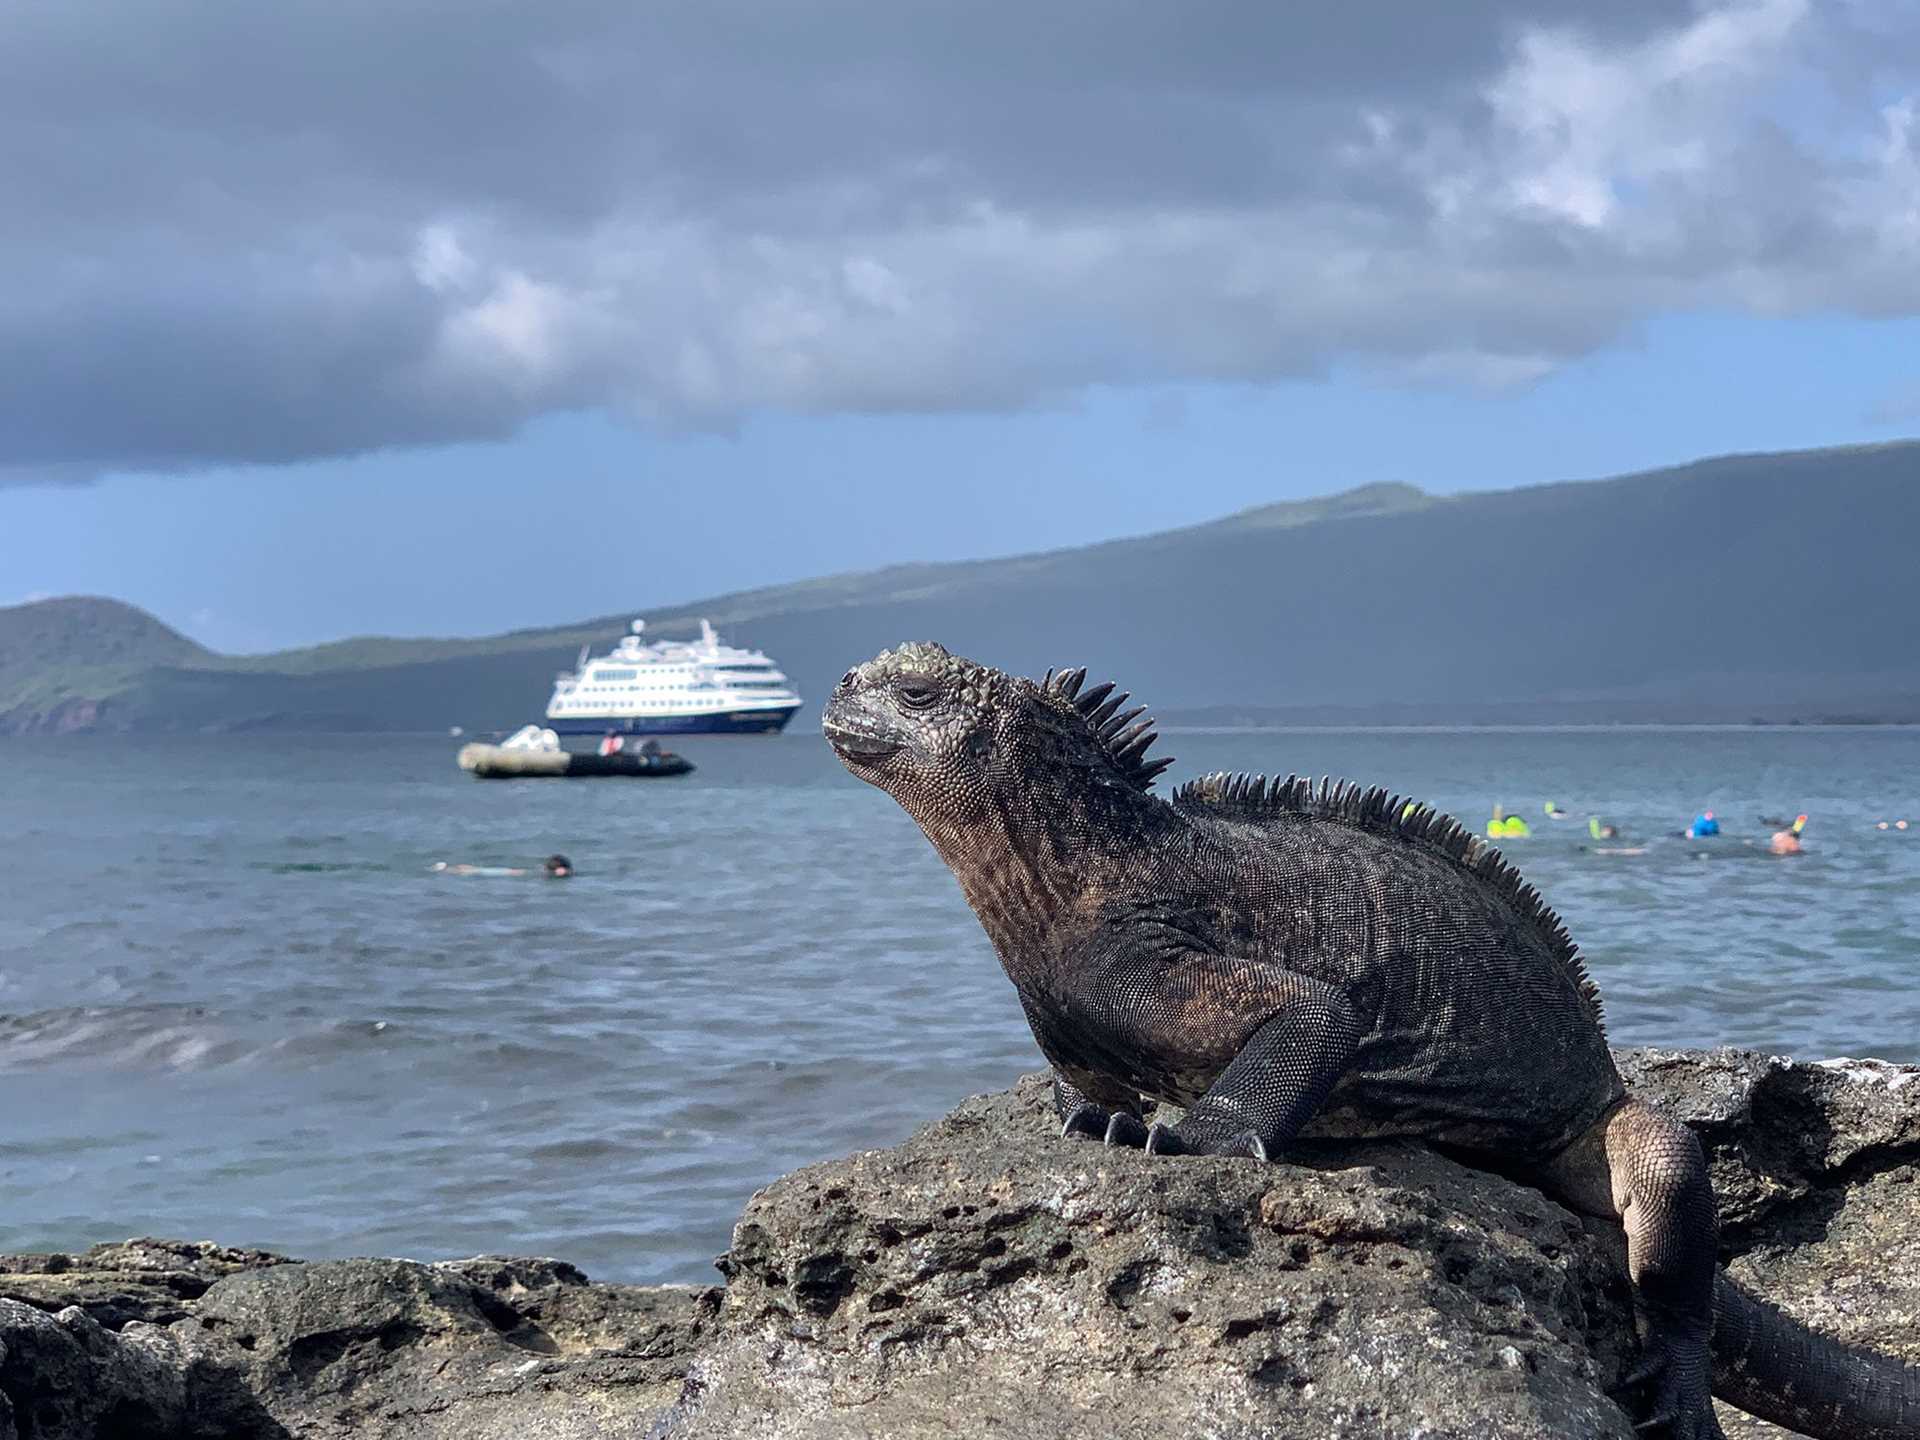 marine iguana with swimmers and ship in the background